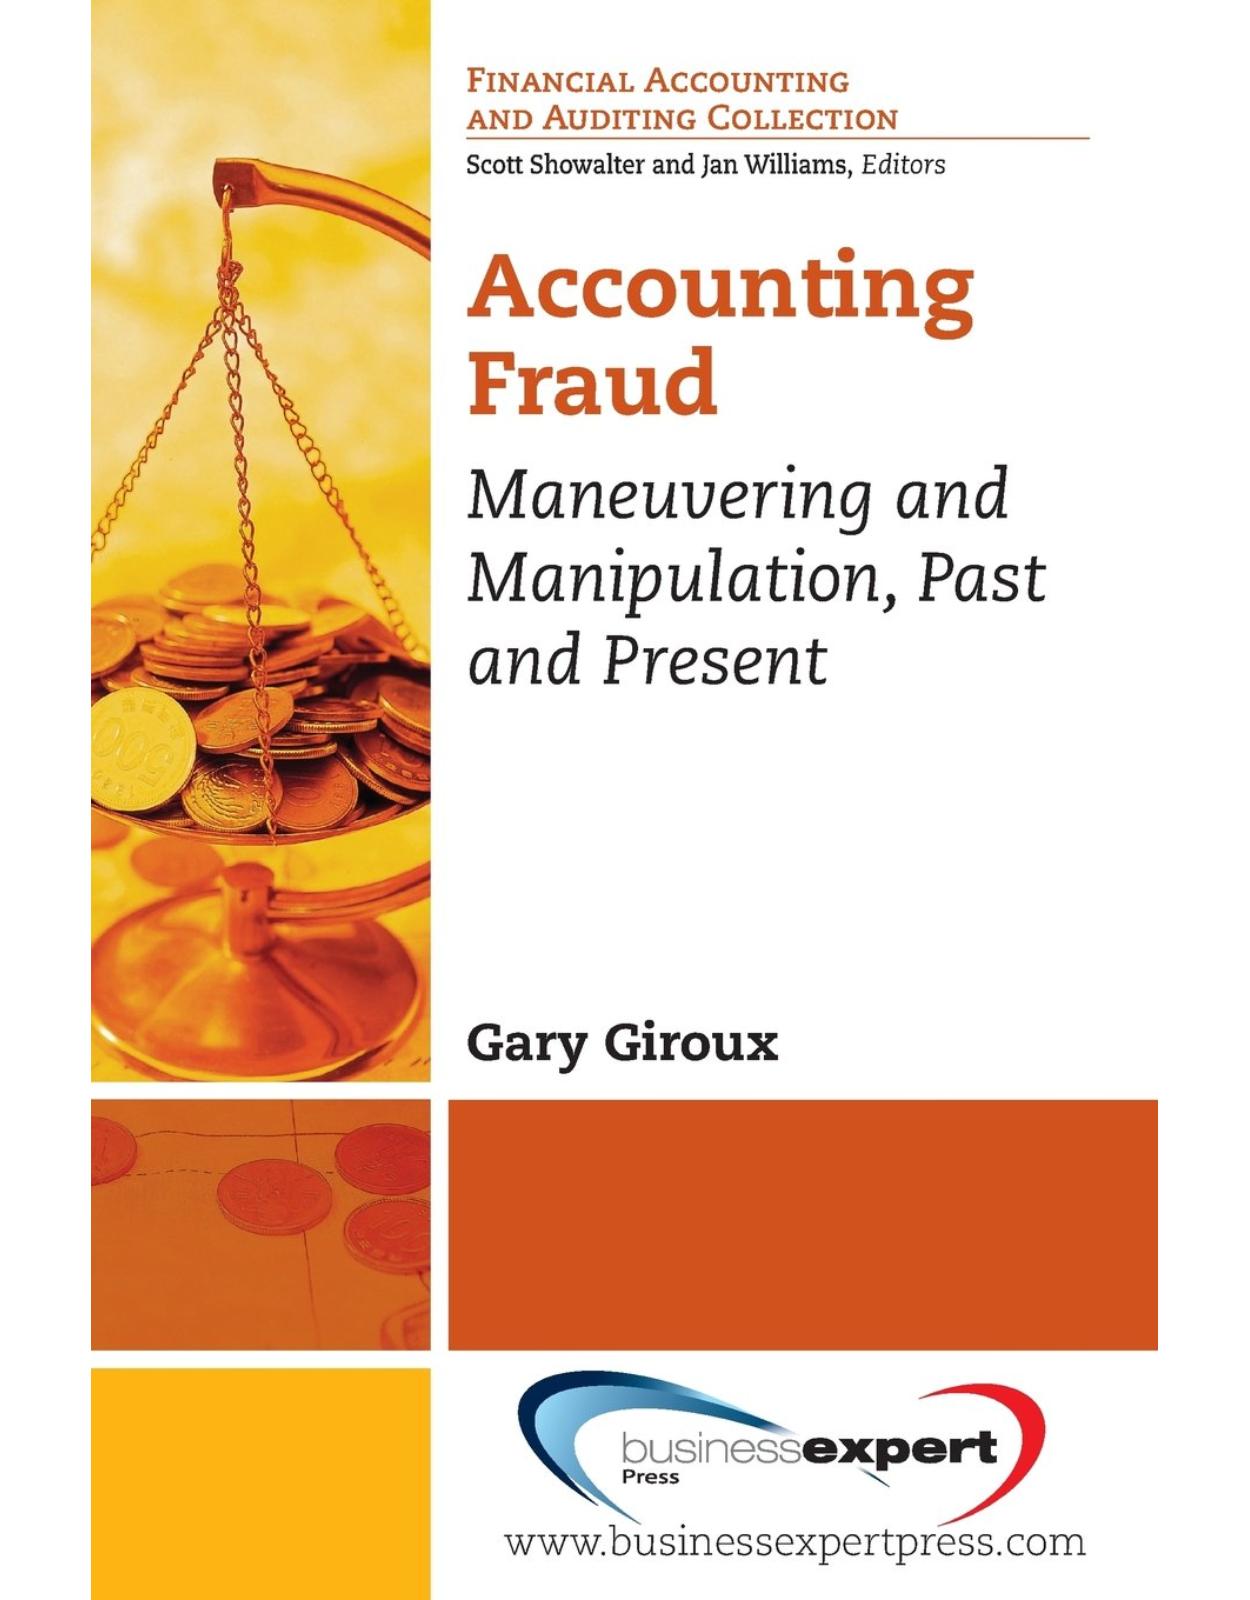 Accounting Fraud: Maneuvering and Manipulation, Past and Present (Financial Accounting and Auditing Collection)